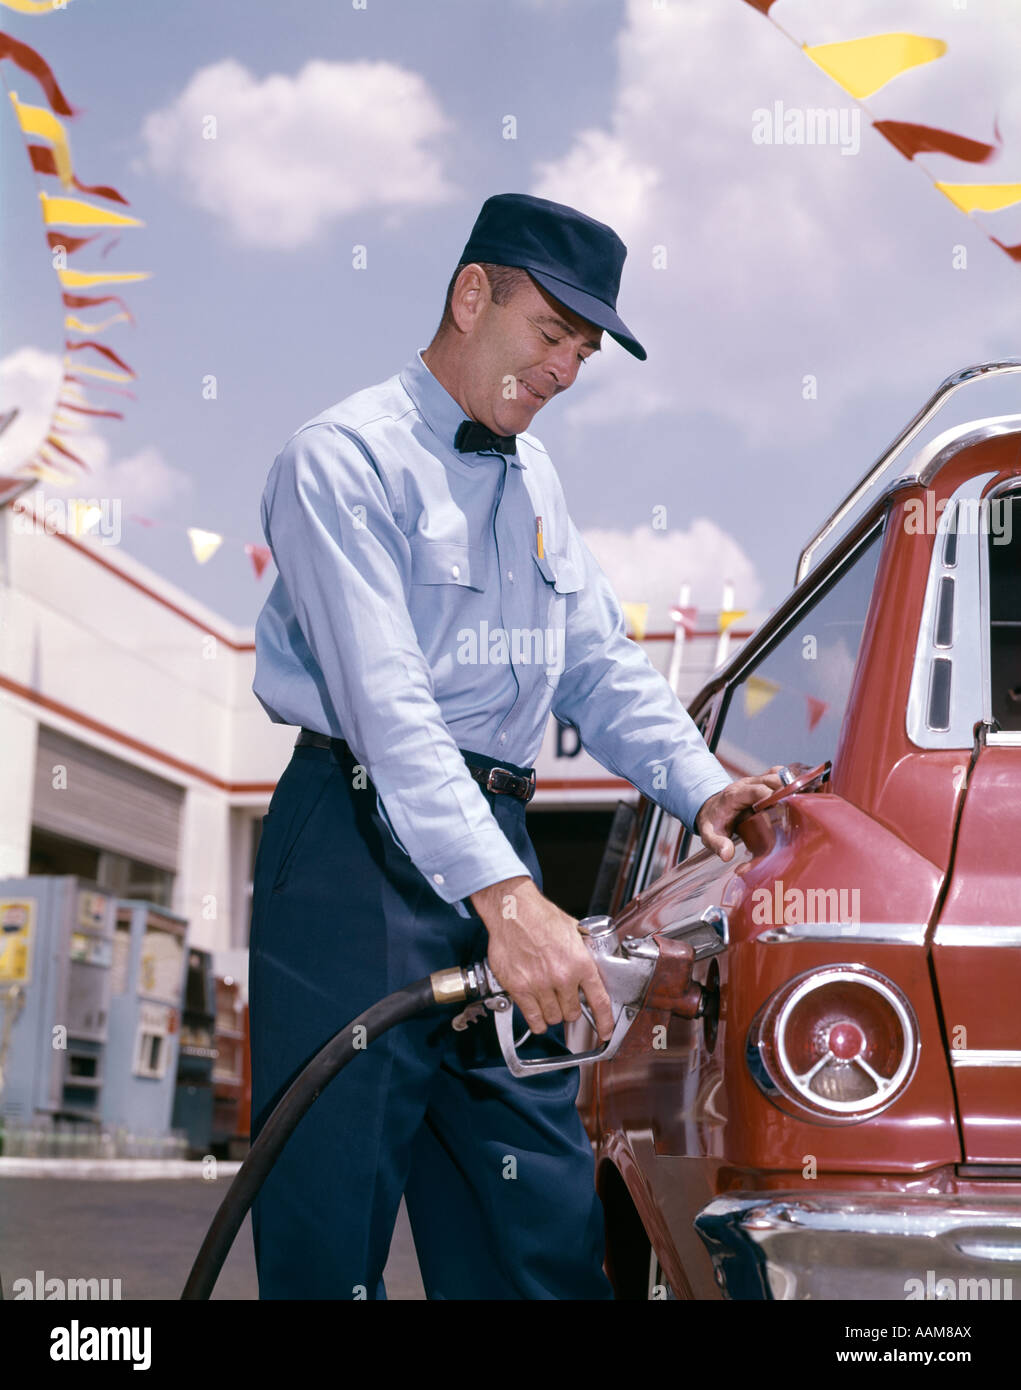 1960s SERVICE STATION ATTENDANT WITH PUMP HOSE FILLING GAS TANK OF AUTOMOBILE Stock Photo